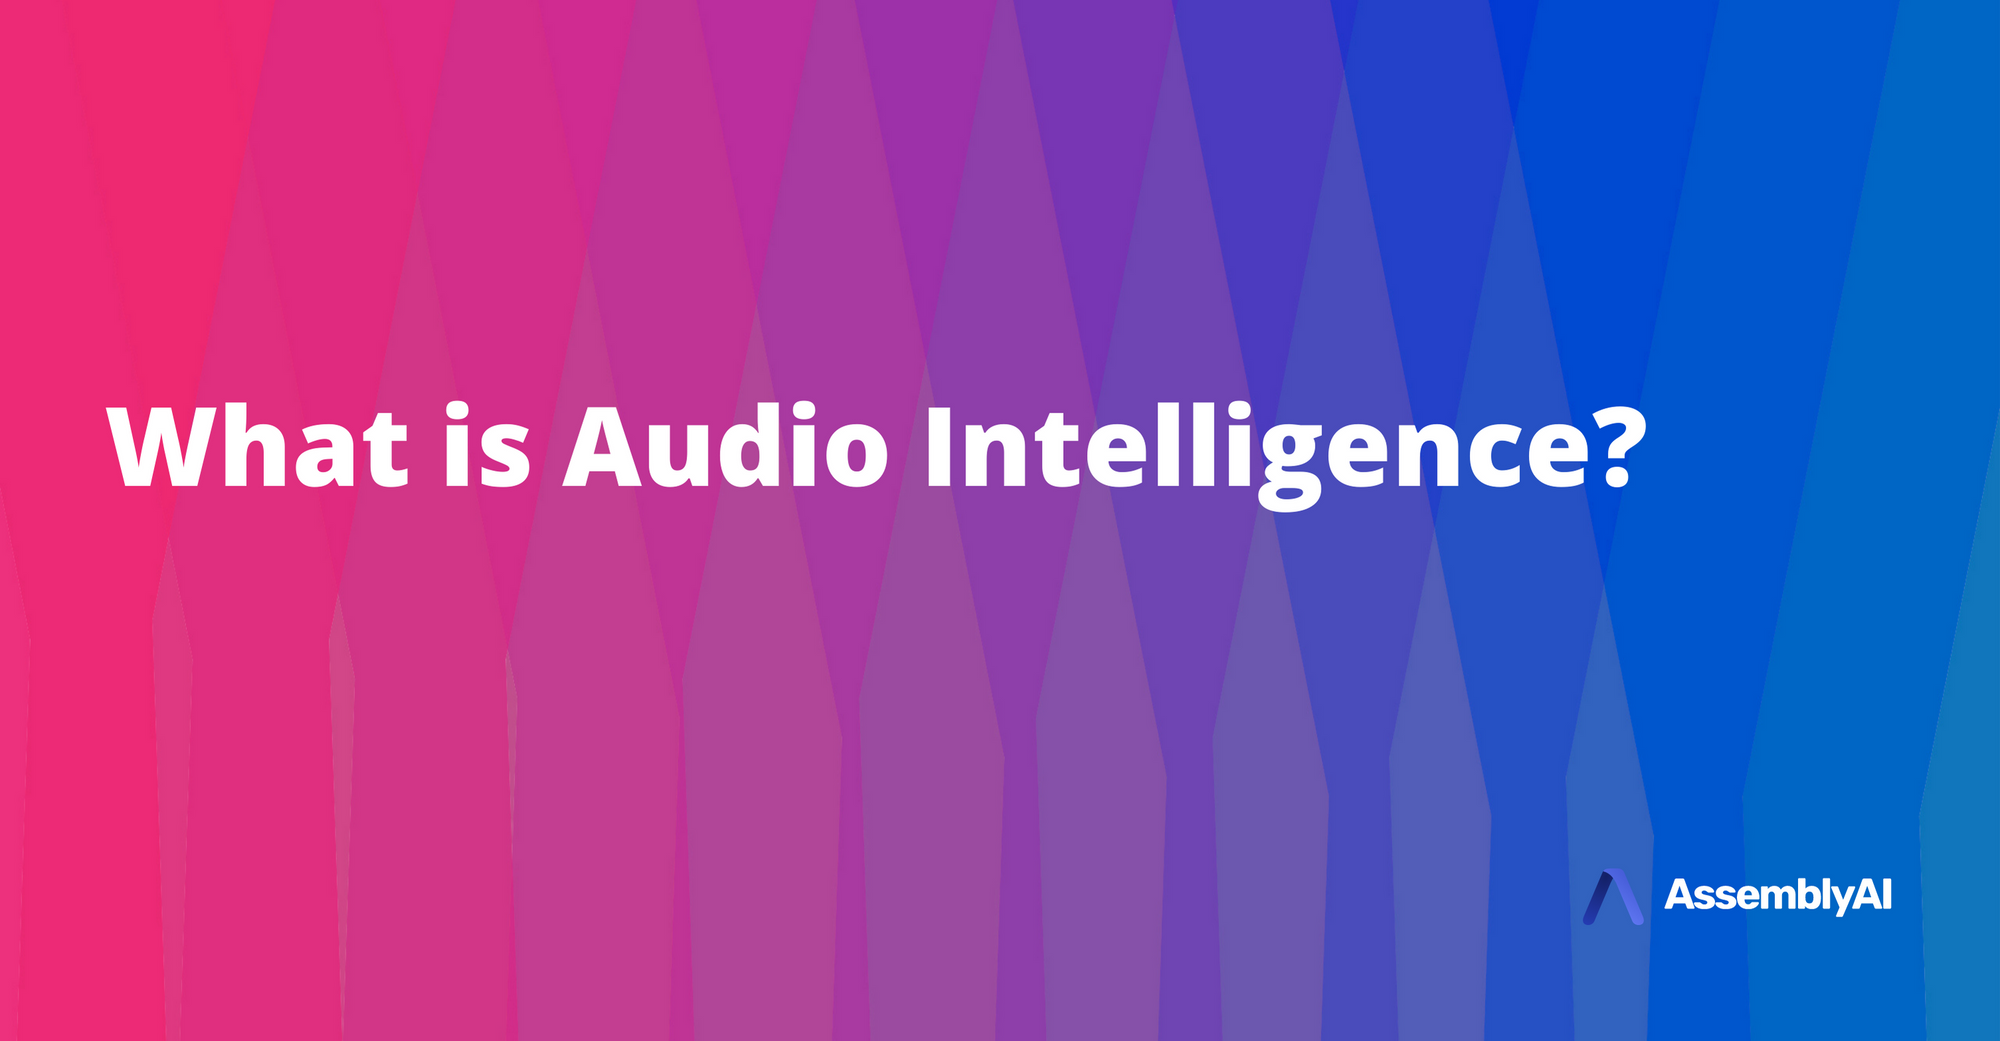 What is Audio Intelligence?